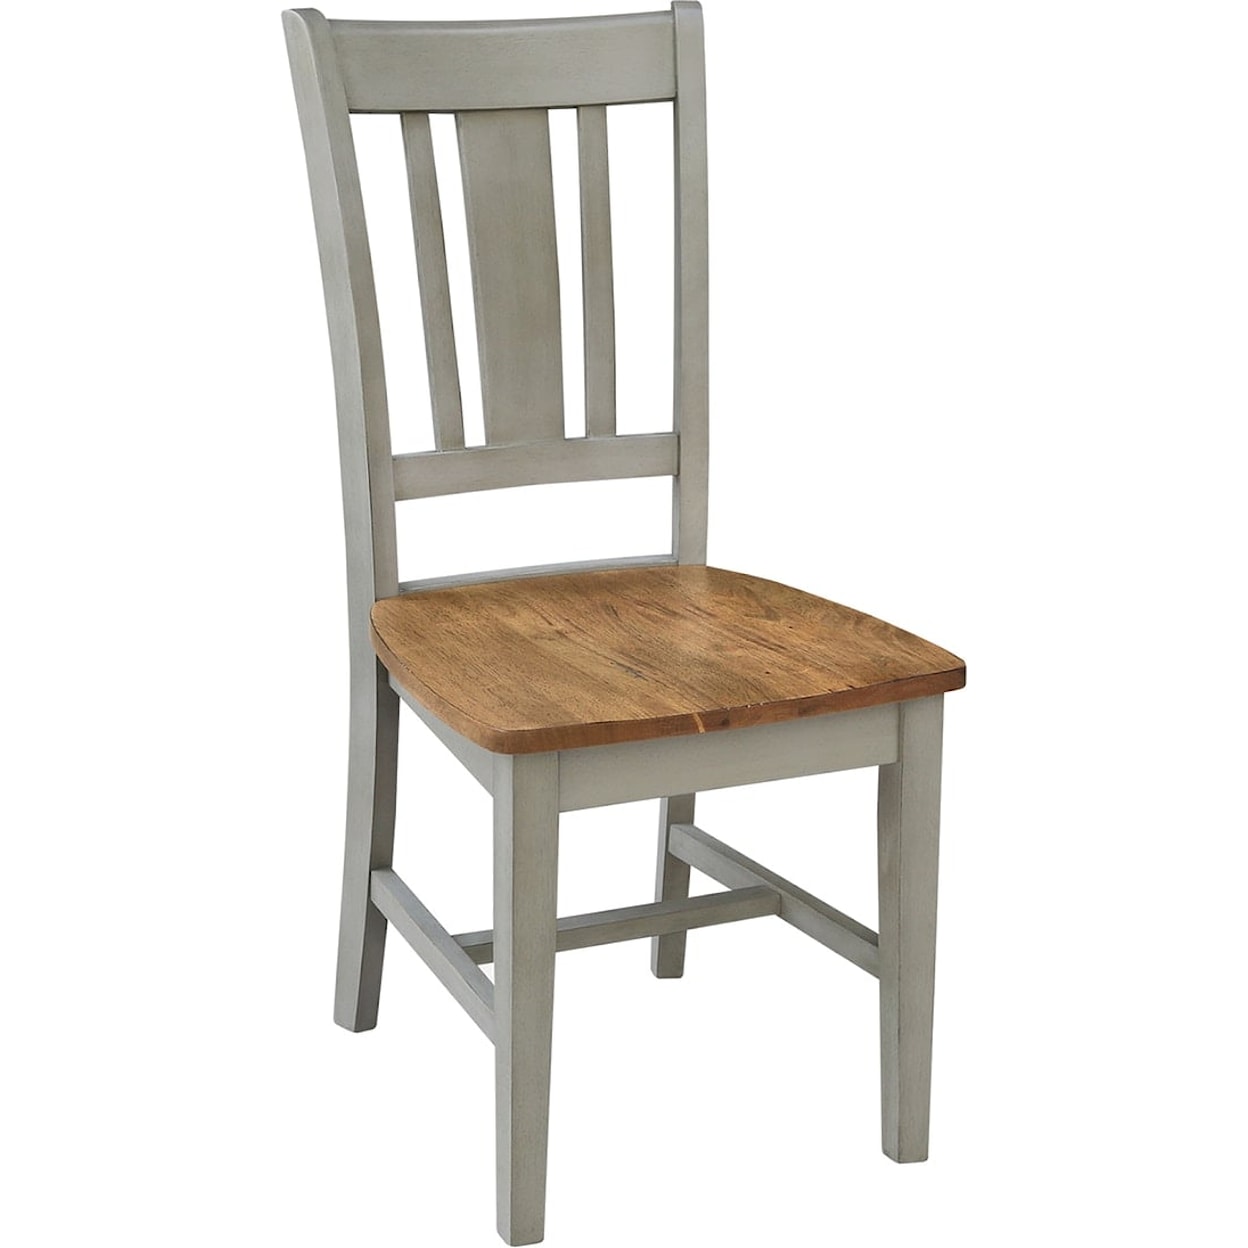 John Thomas Dining Essentials San Remo Dining Chair in Hickory / Stone